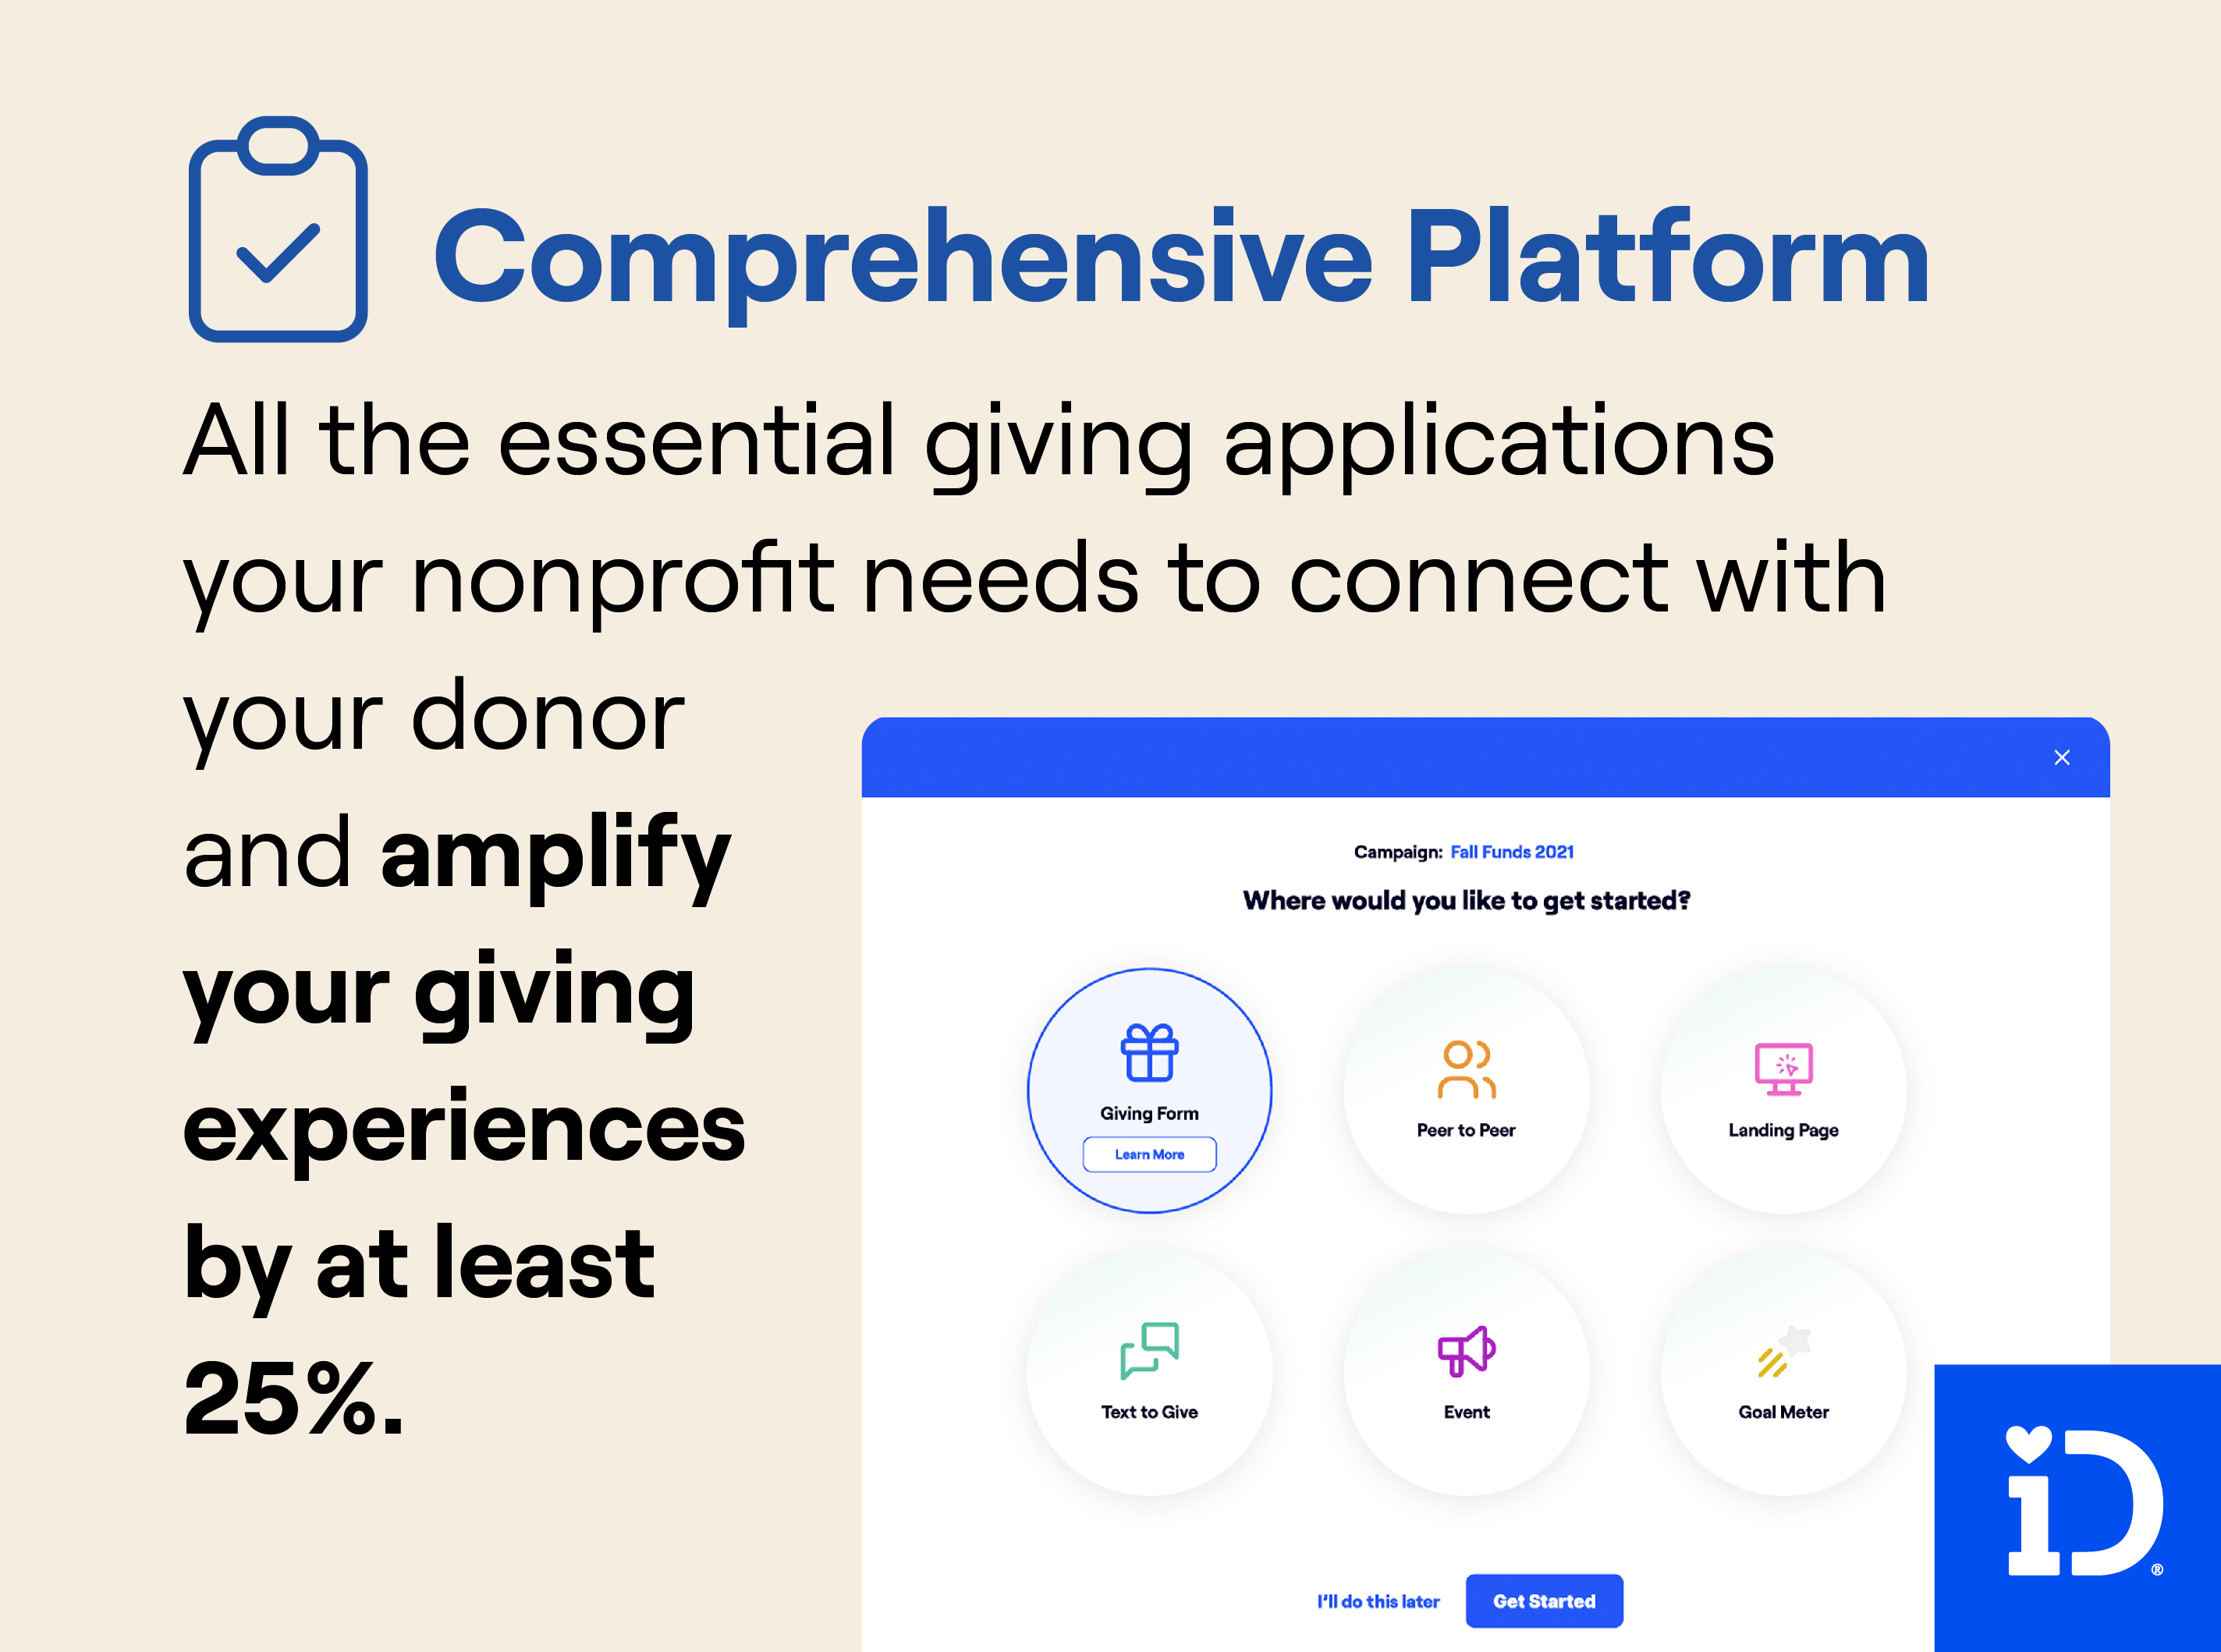 Simply Connect with Donors. Deploy digital giving experiences across all donor touch-points with our all-in-one-place comprehensive suite of giving tools to increase donor reach and conversion.